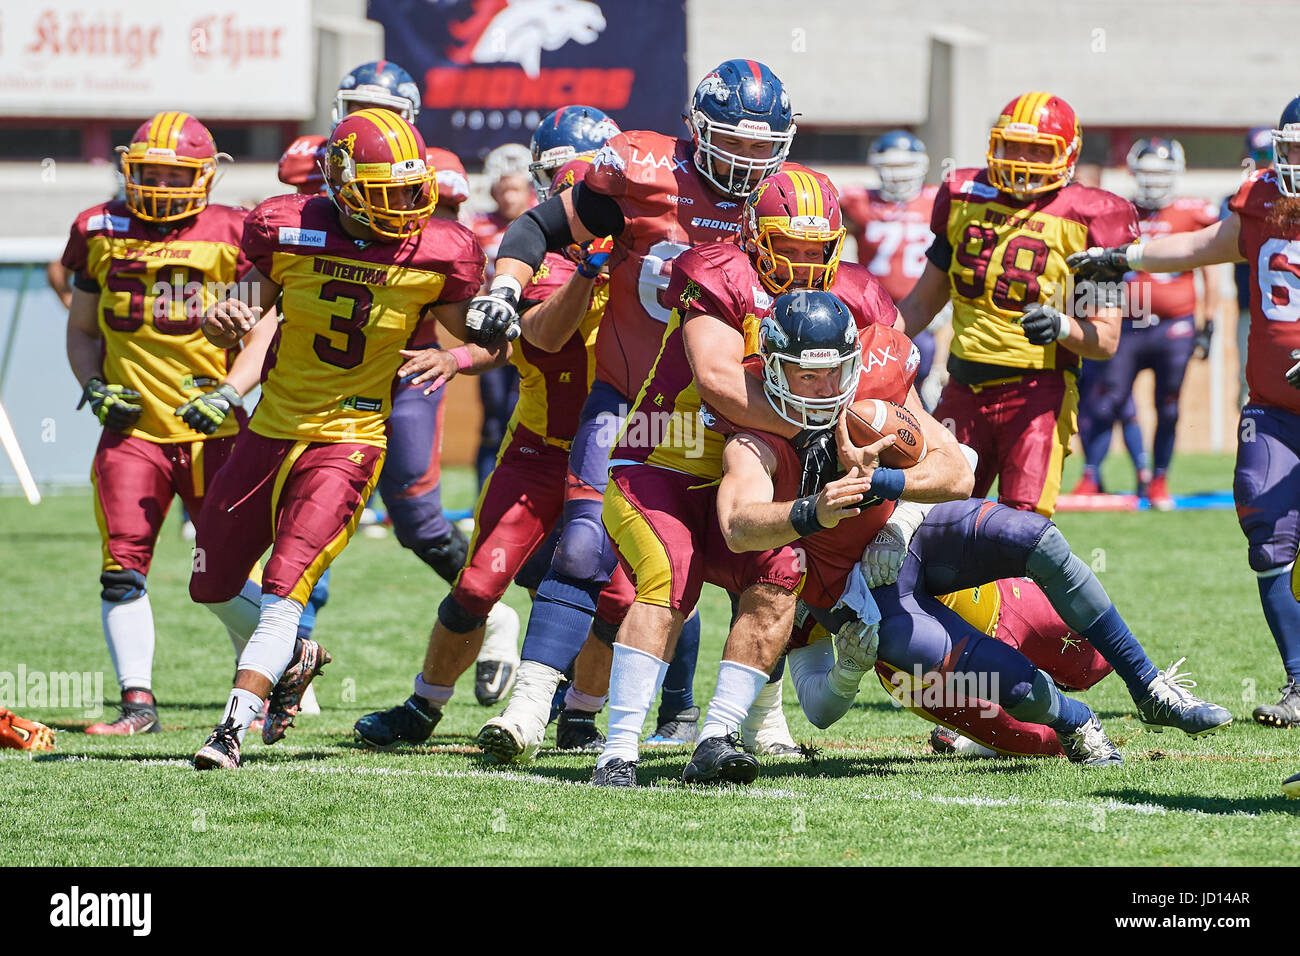 Chur, Switzerland. 18th June, 2017. Broncos attack is stopped by Warriors during the American Football match Calanda Broncos vs. Winterthur Warriors. © Rolf Simeon/Alamy Live News. Stock Photo